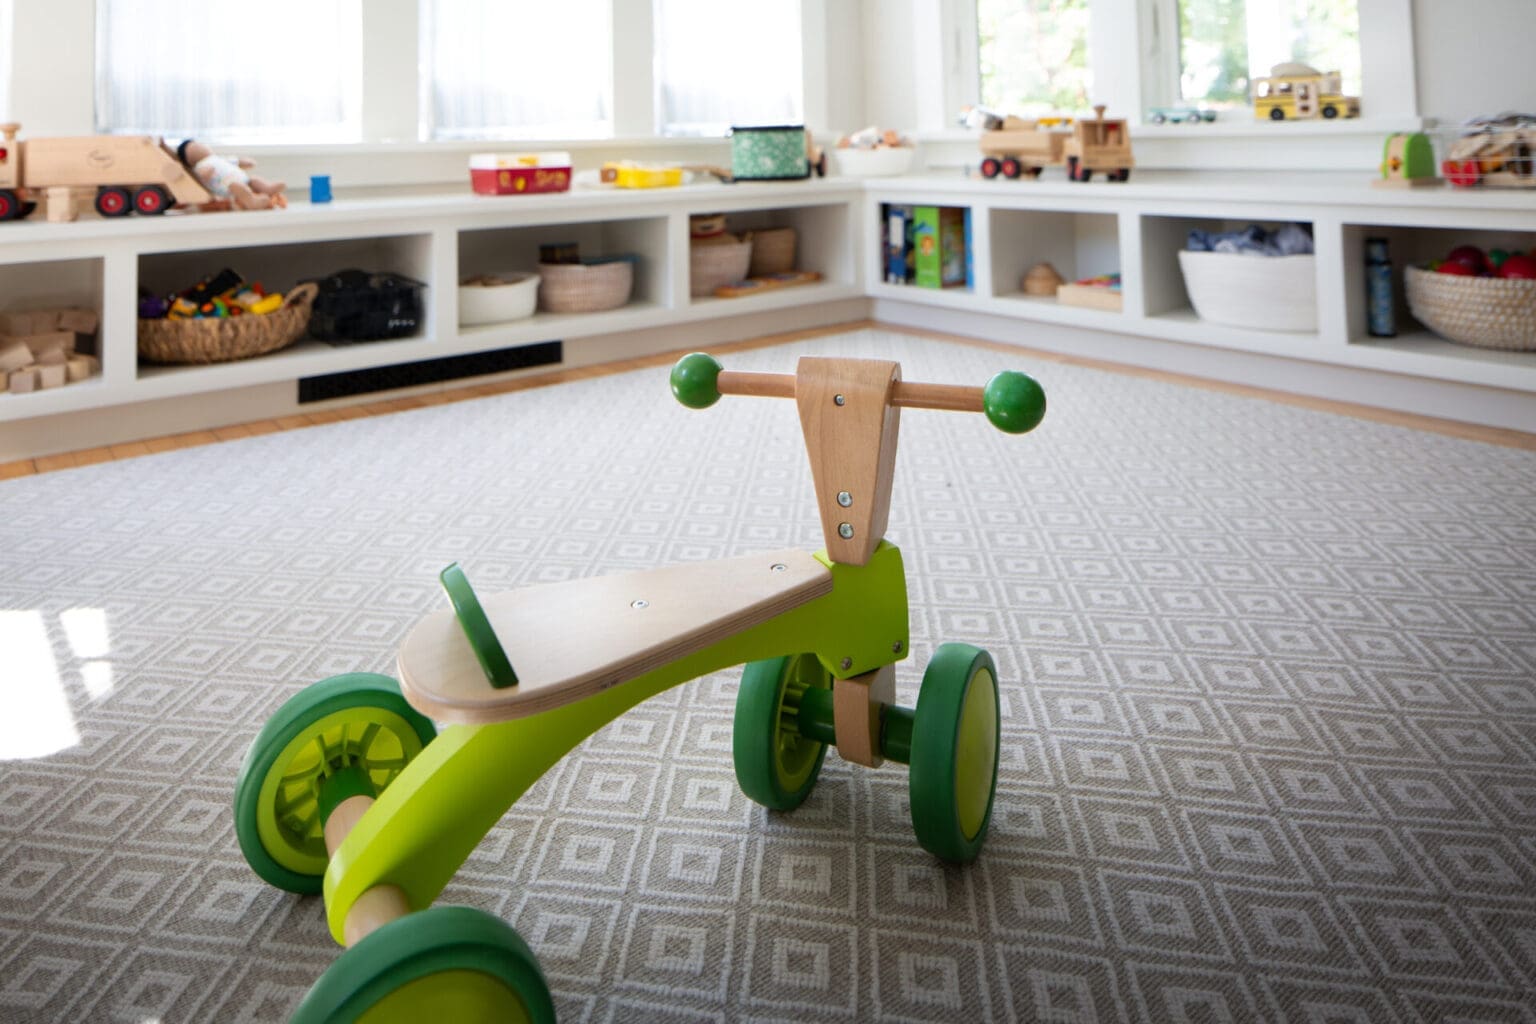 A photo of a green toy bicycle in a child's playroom with built-in storage and large windows.